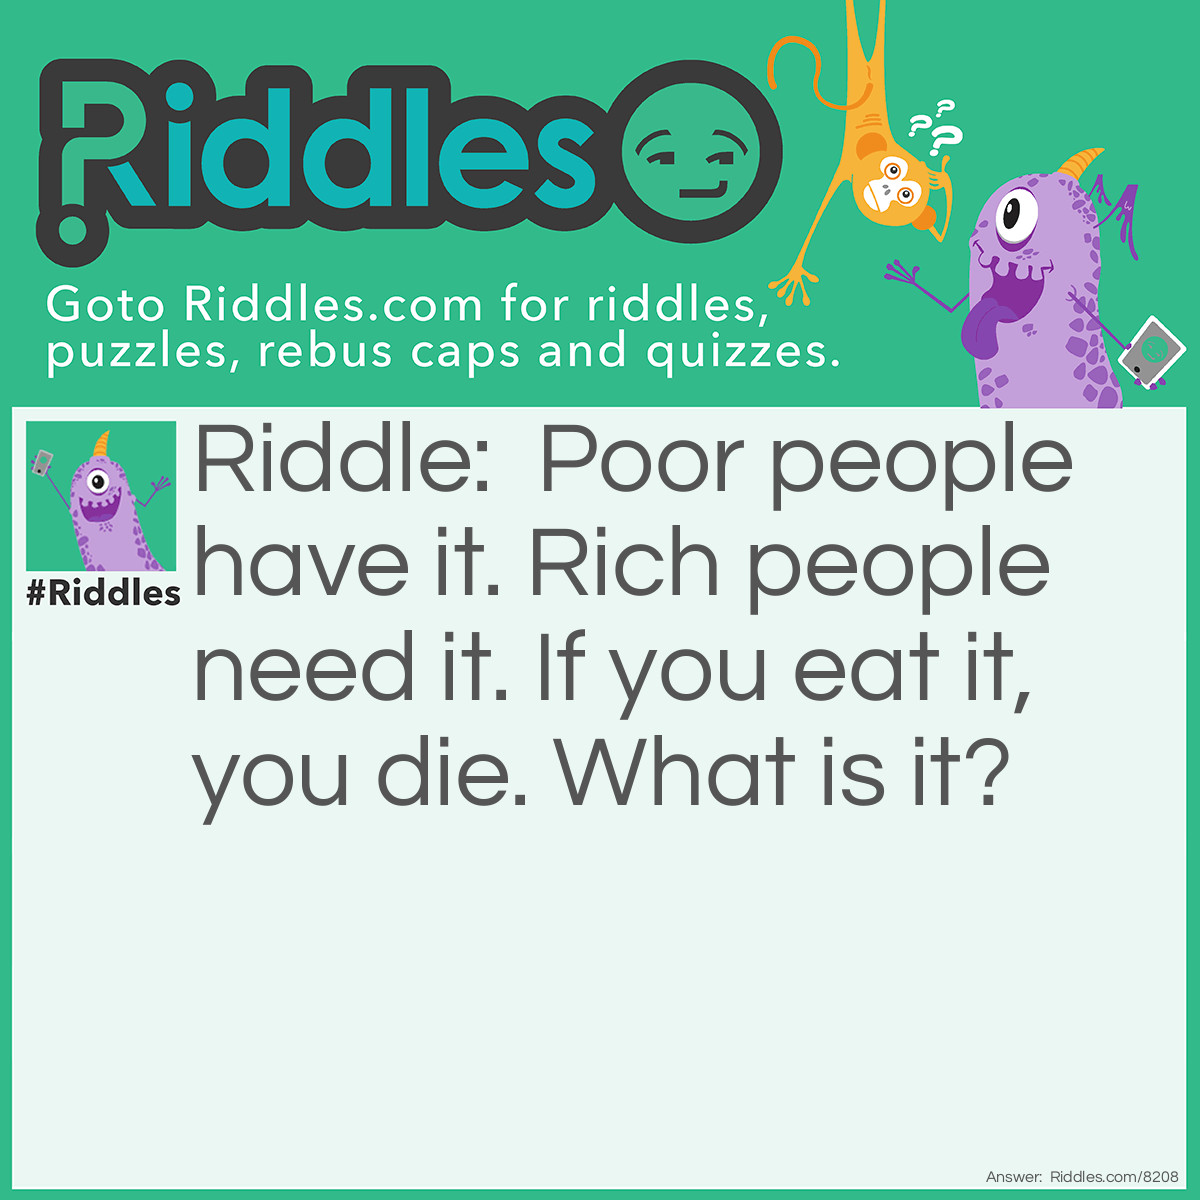 Riddle: Poor people have it. Rich people need it. If you eat it, you die. What is it? Answer: Nothing.